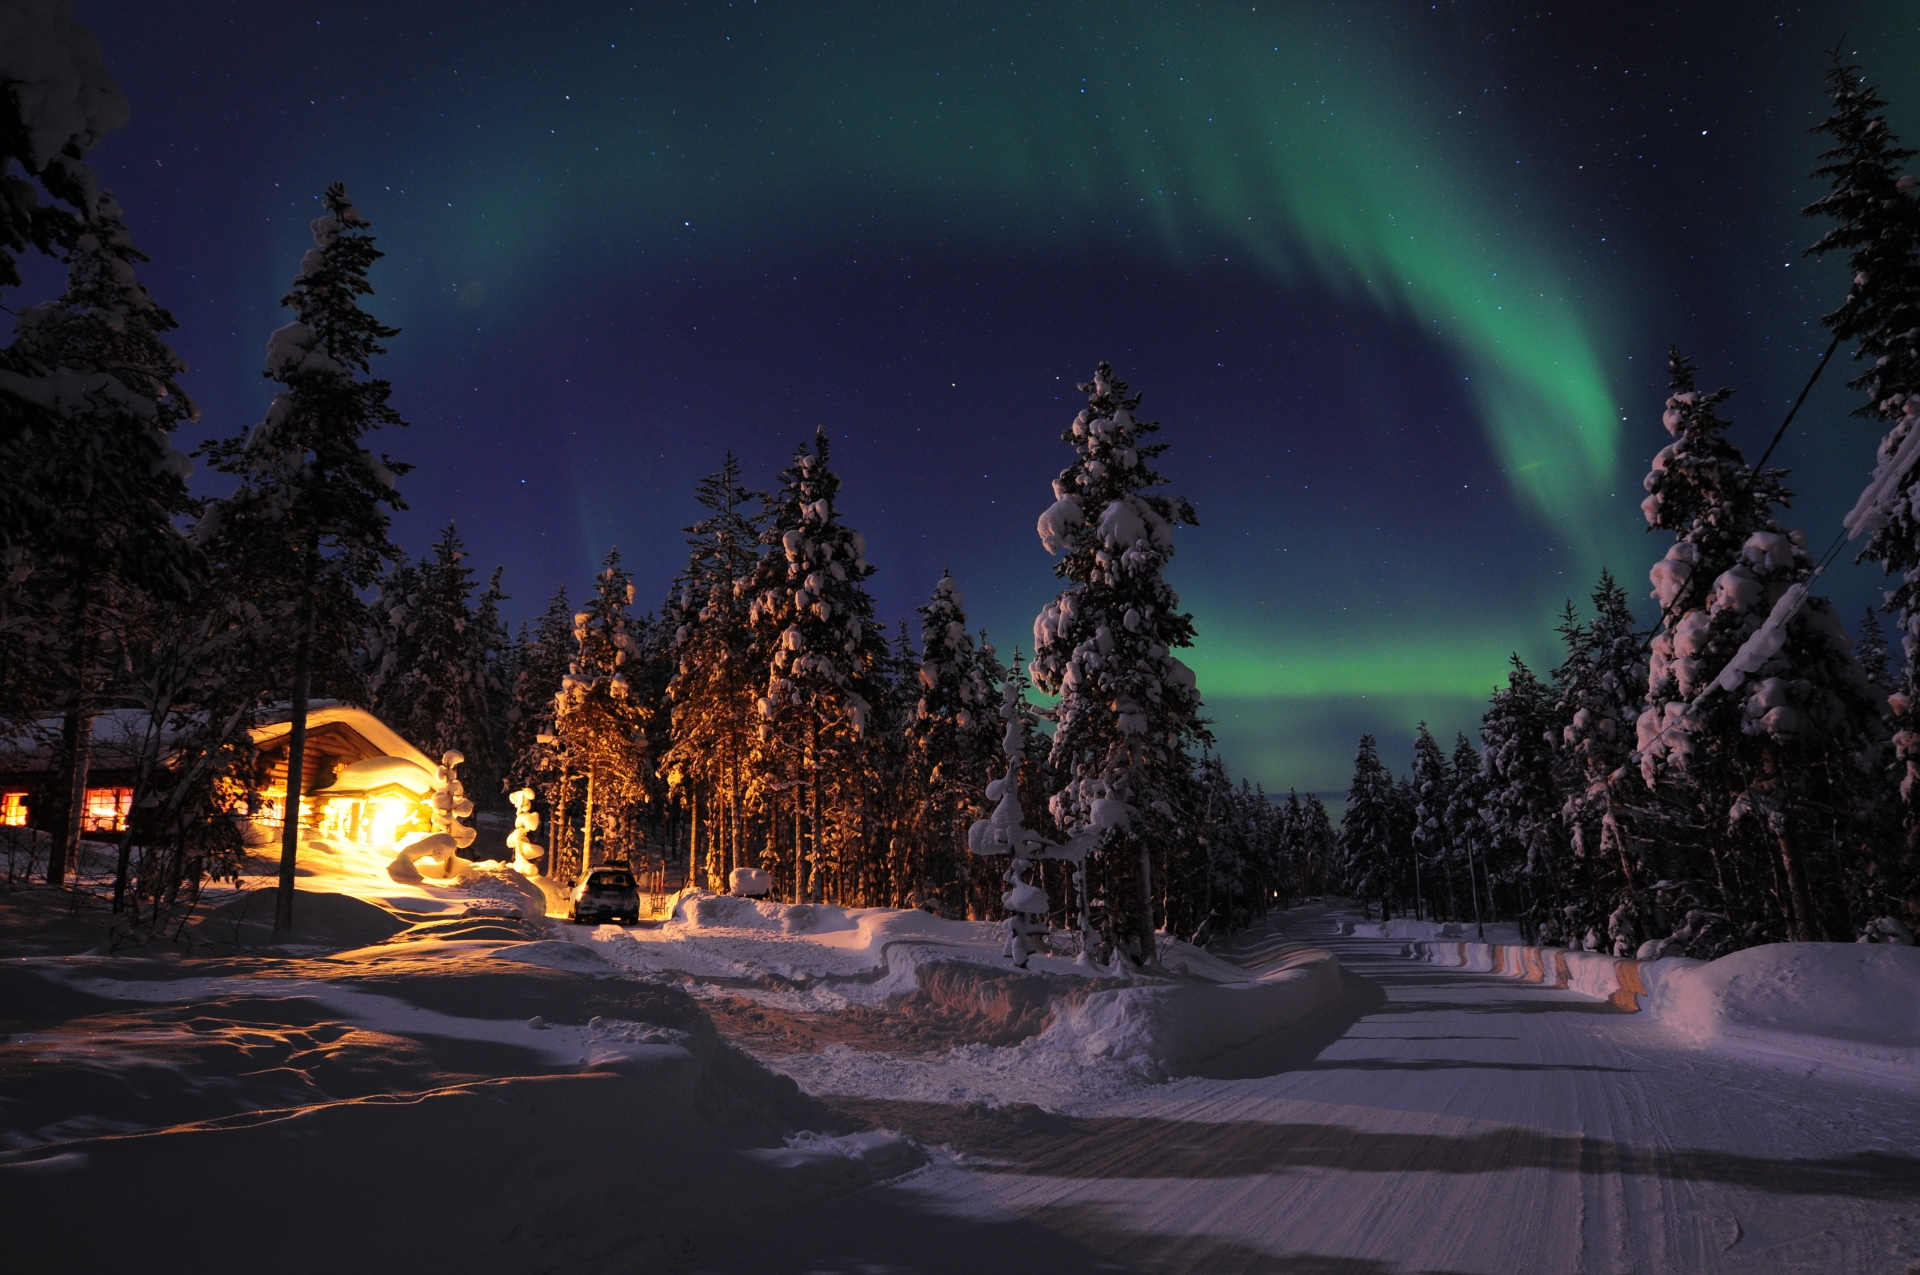 Northern Lights - A magical trip to visit Father Christmas